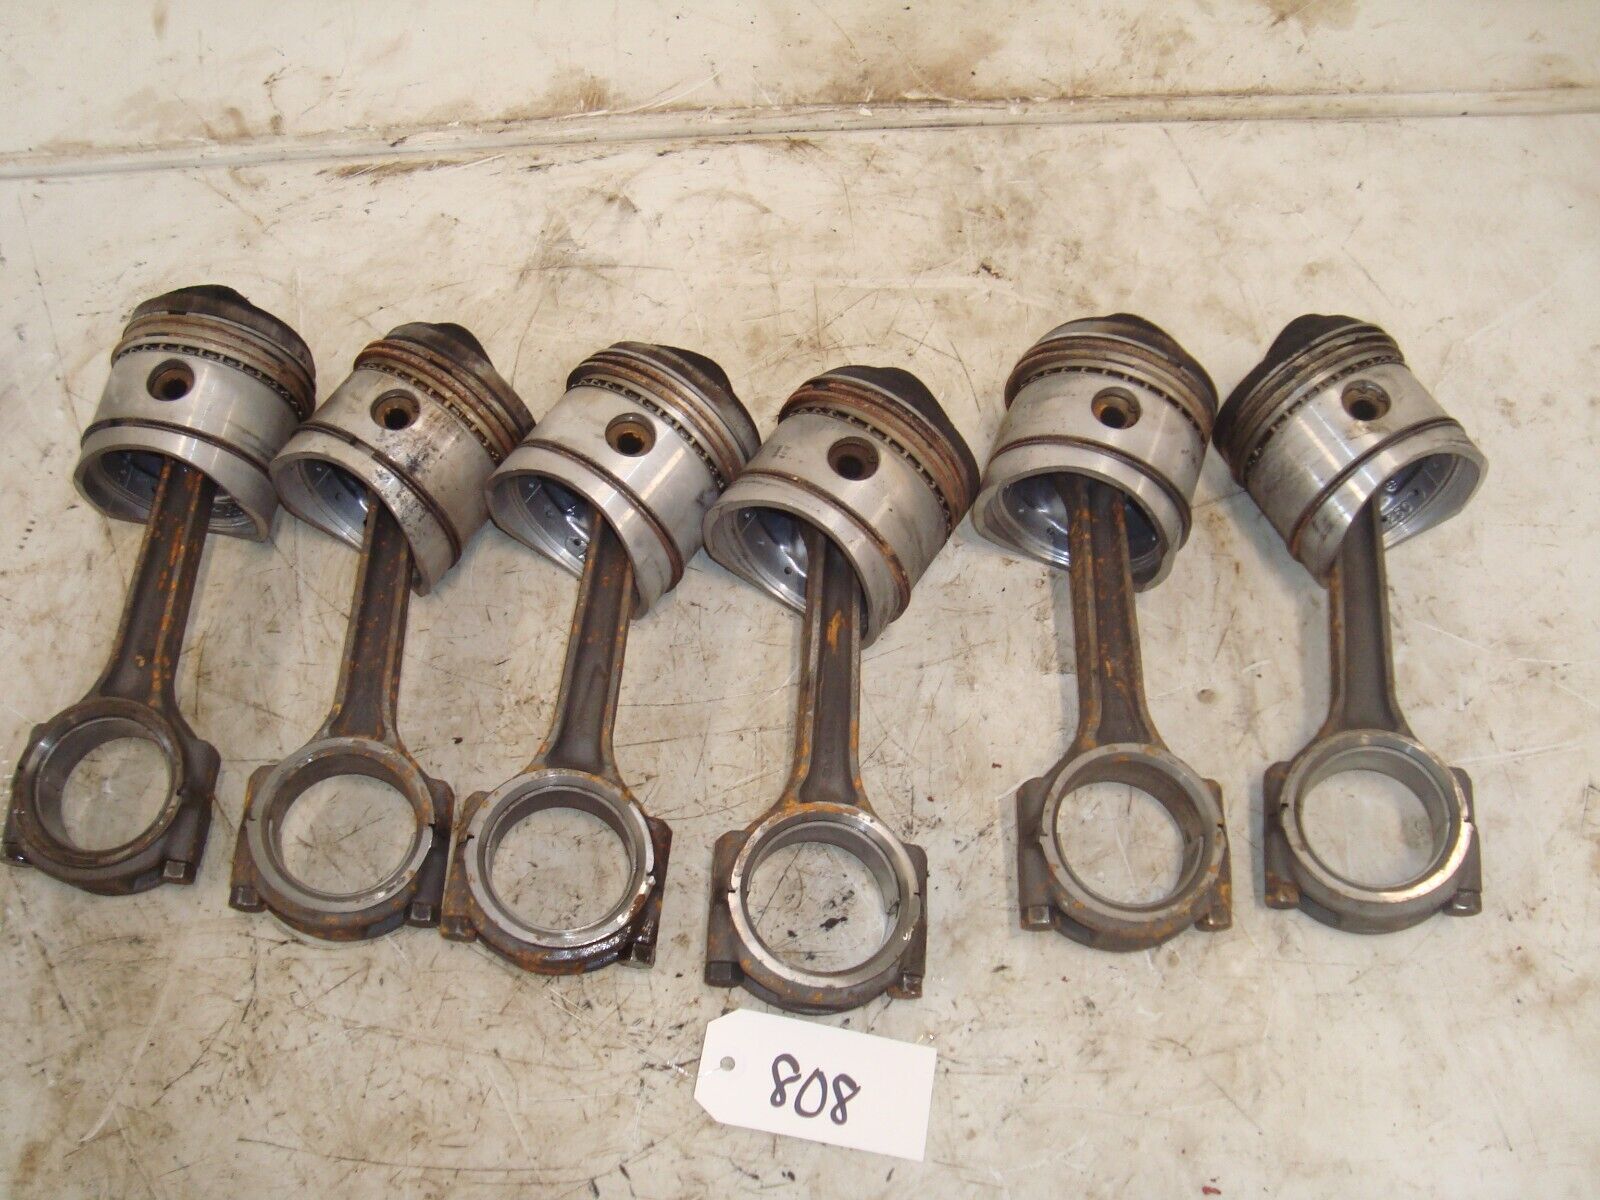 1964 Farmall IH 706 Gas Tractor Pistons & Connecting Rods